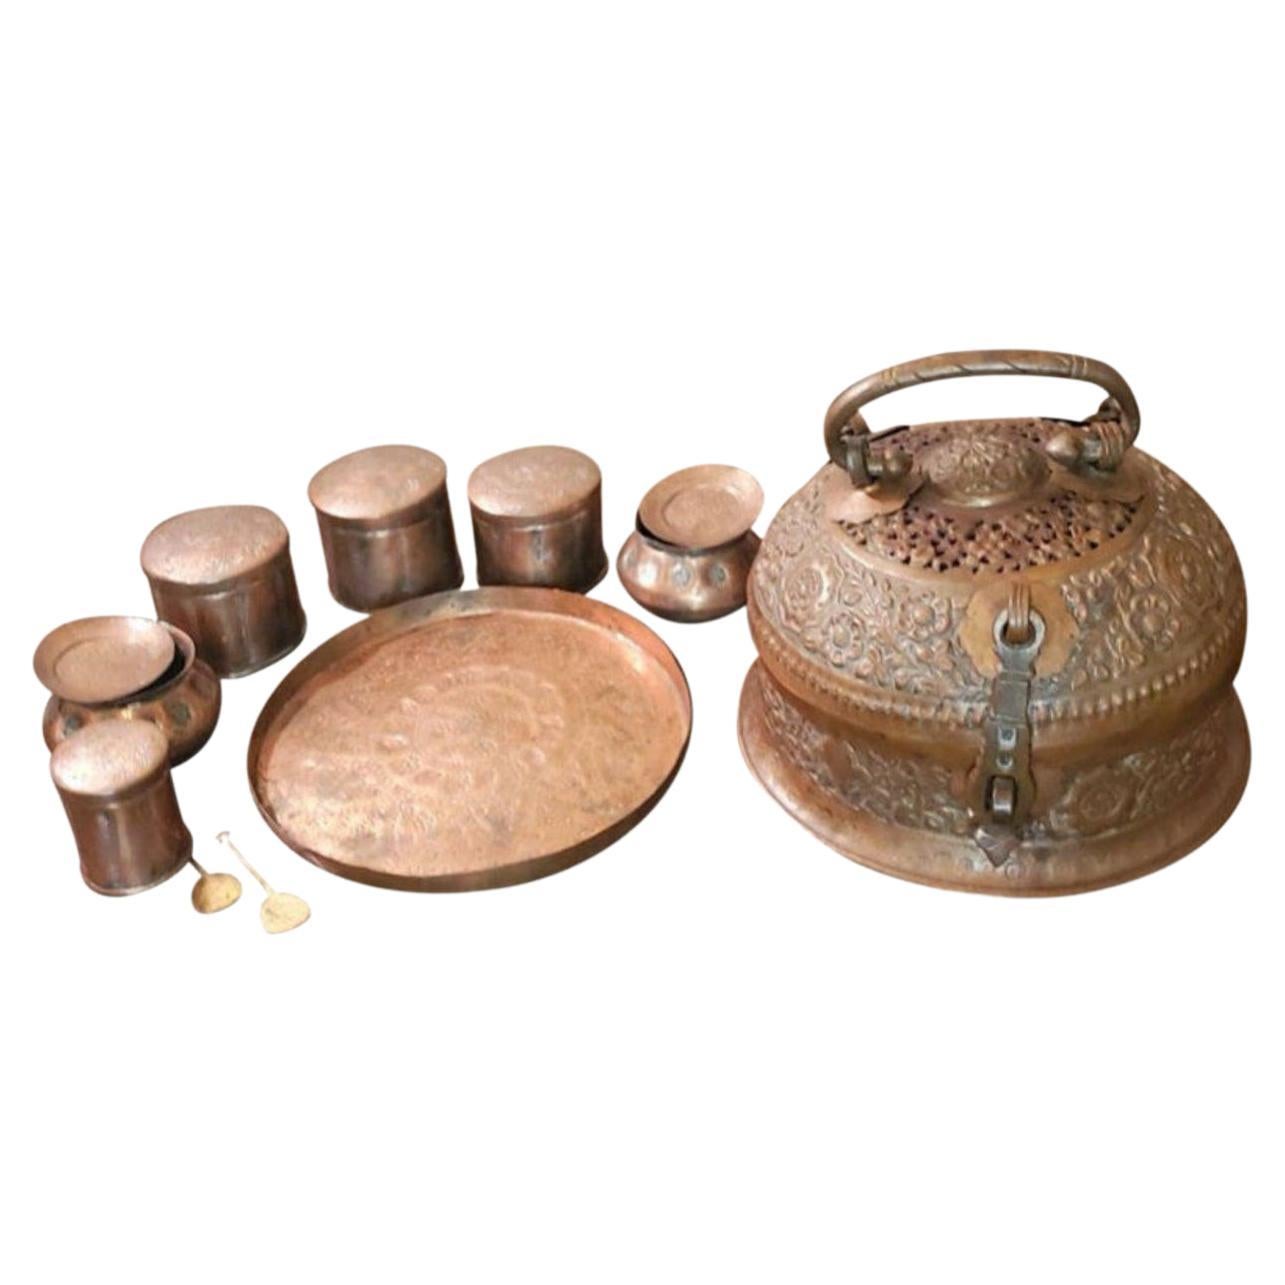 19th Century Indian Hammered Copper & Bronze Betel Nut Paan-Daan Stash Box For Sale